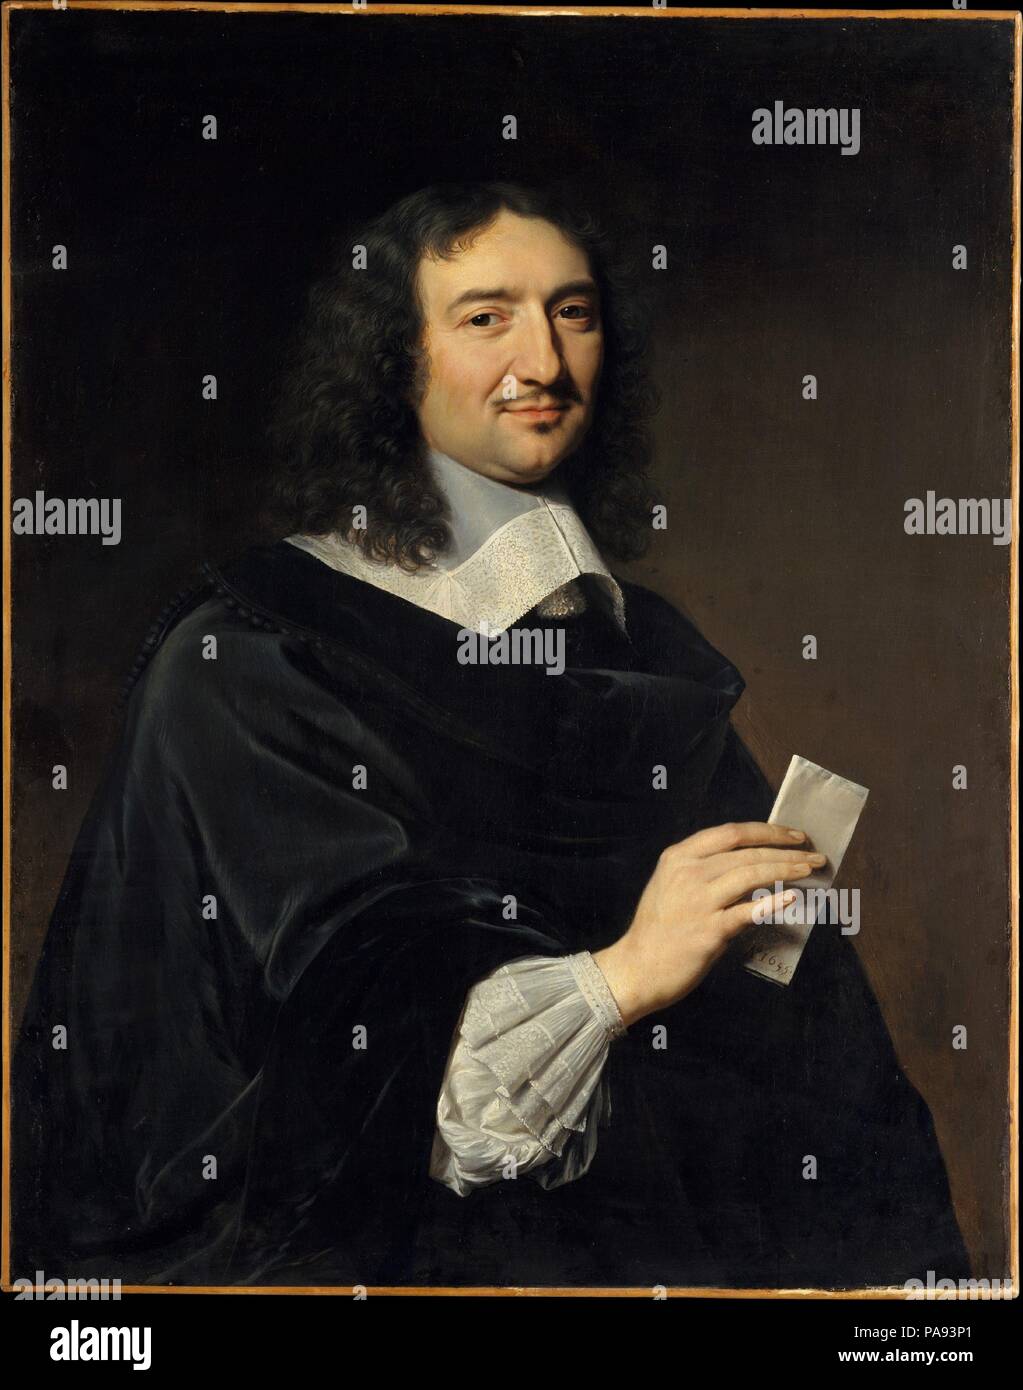 Jean-Baptiste Colbert (1619-1683). Artist: Philippe de Champaigne (French, Brussels 1602-1674 Paris). Dimensions: 36 1/4 x 28 1/2 in. (92.1 x 72.4 cm). Date: 1655.  In 1651 Colbert joined the household of Cardinal Mazarin, principal advisor to Queen Anne of Austria during the minority of Louis XIV (1638-1715), and one of the great collectors of the seventeenth century. Having recouped the cardinal's fortune, Colbert entered the king's service and, ten years after he sat for this portrait, was appointed minister of finance. He was instrumental in reforming the arts to serve the monarchy. In 164 Stock Photo